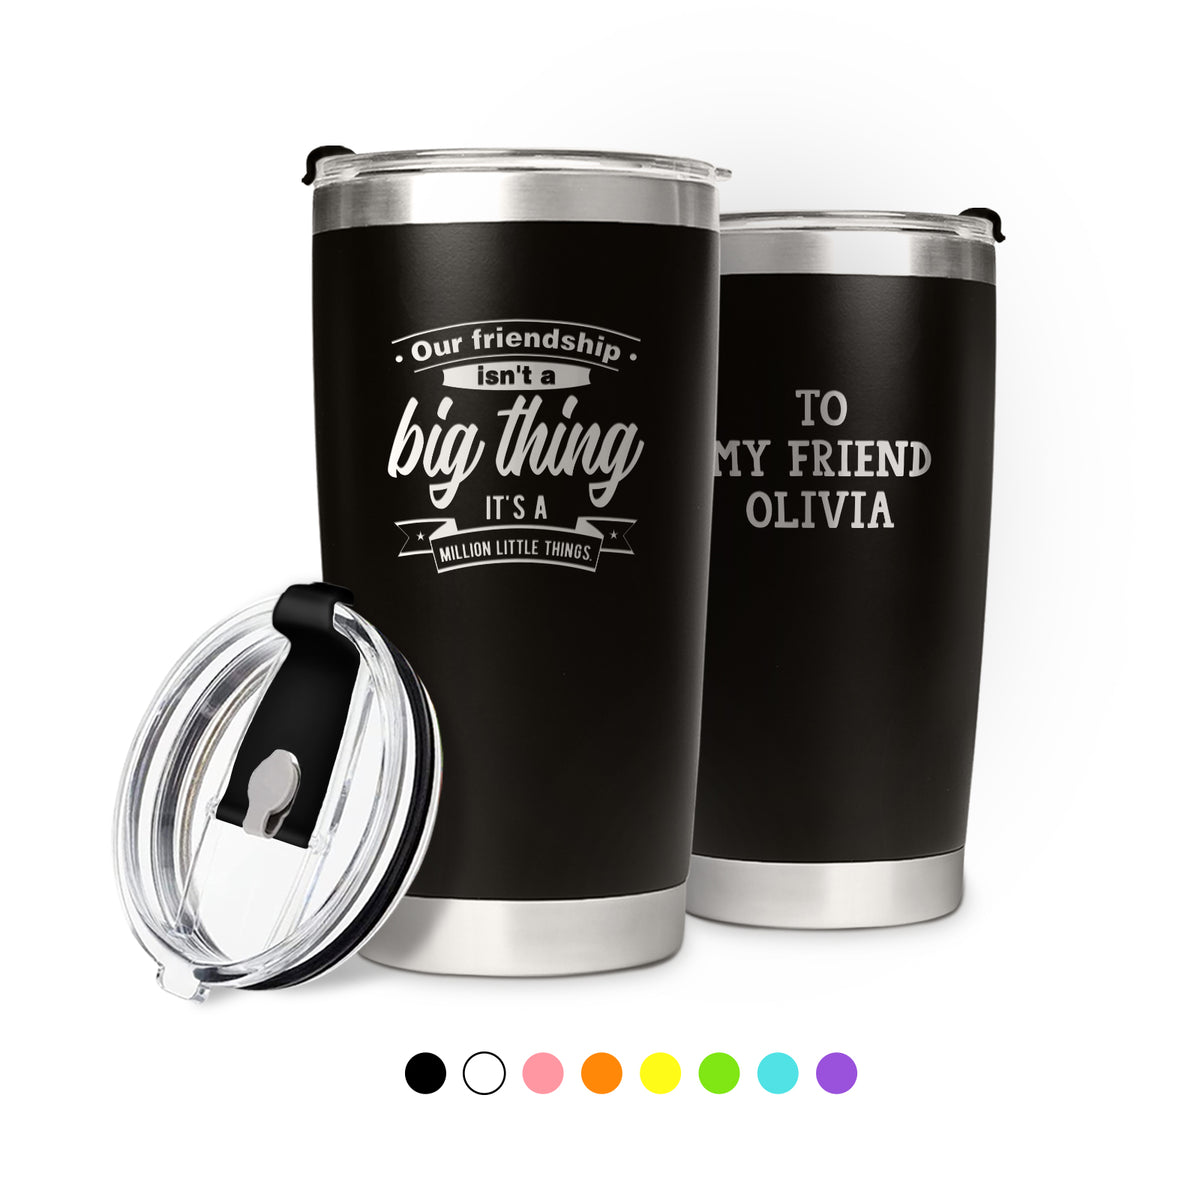 Friendship Isn't A Big Thing Personalized Tumbler with Engraved Name